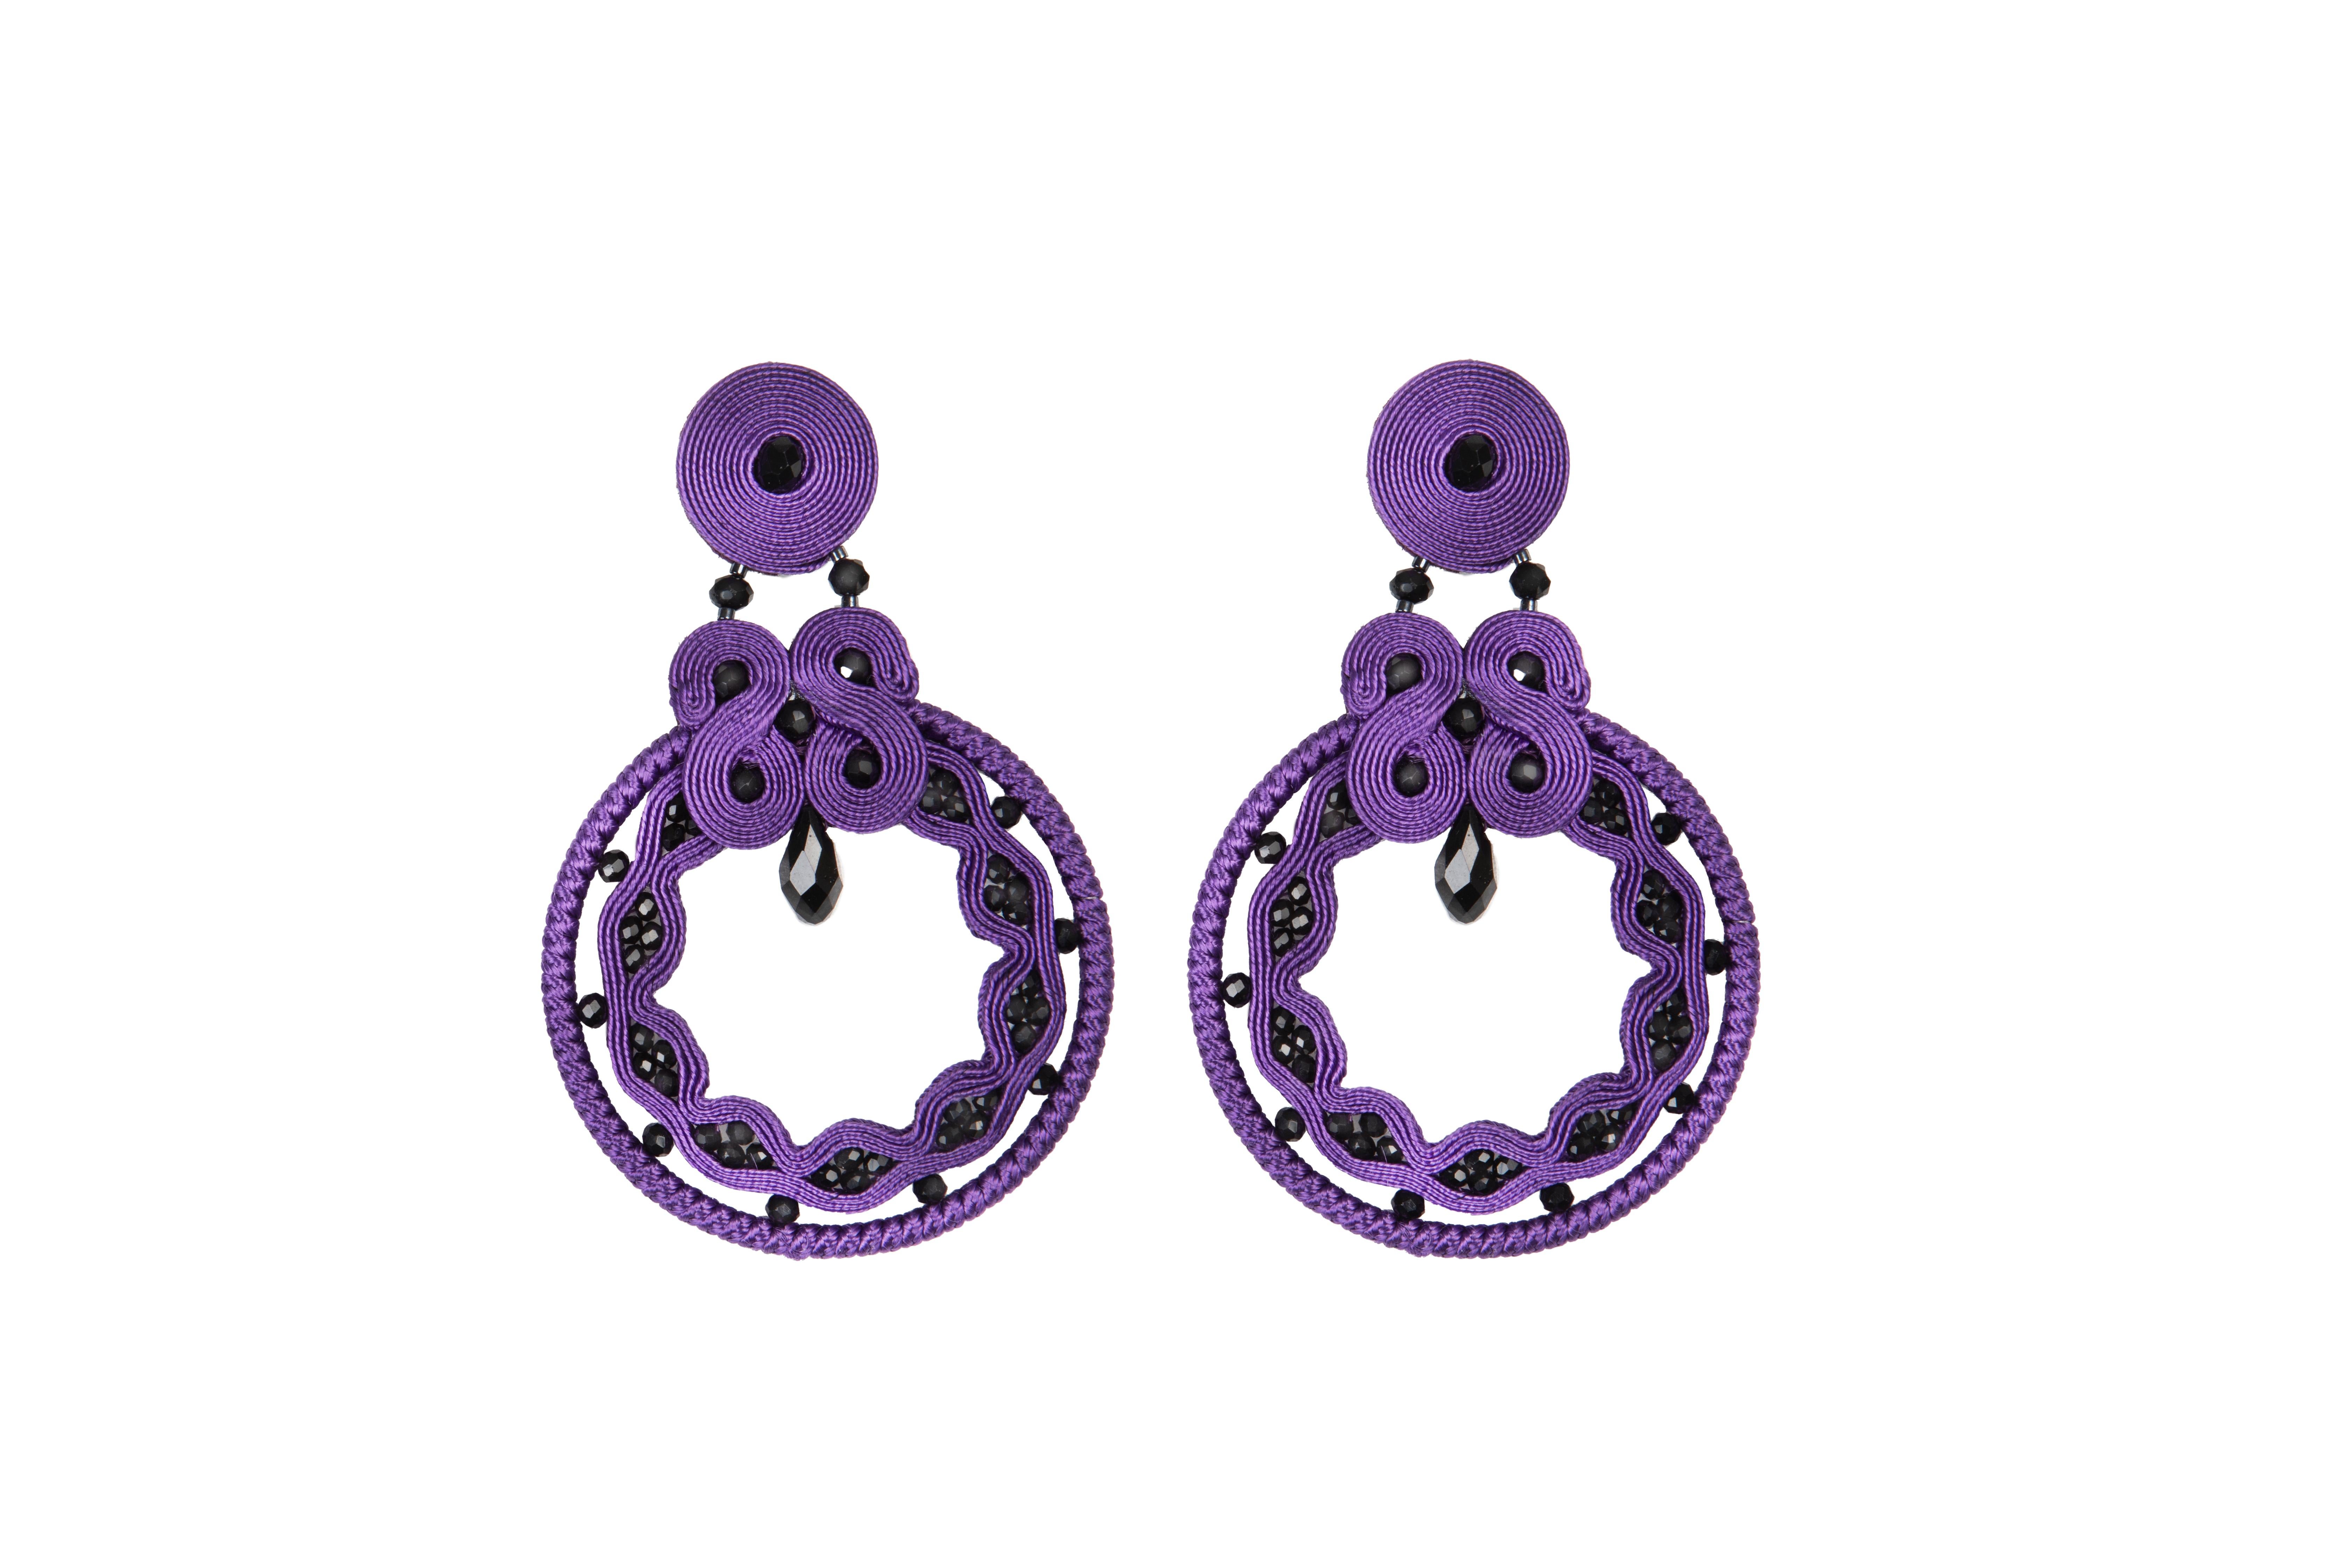 Musula Miabril Nazareno Purple & Jet Soutache Earrings  Silver Closure
Soutache earrings made with silk rayon and crystal beads & silver closure
In nine beautiful colours each for different moment and dresses for the Feria 
 MiAbril @miabril is a